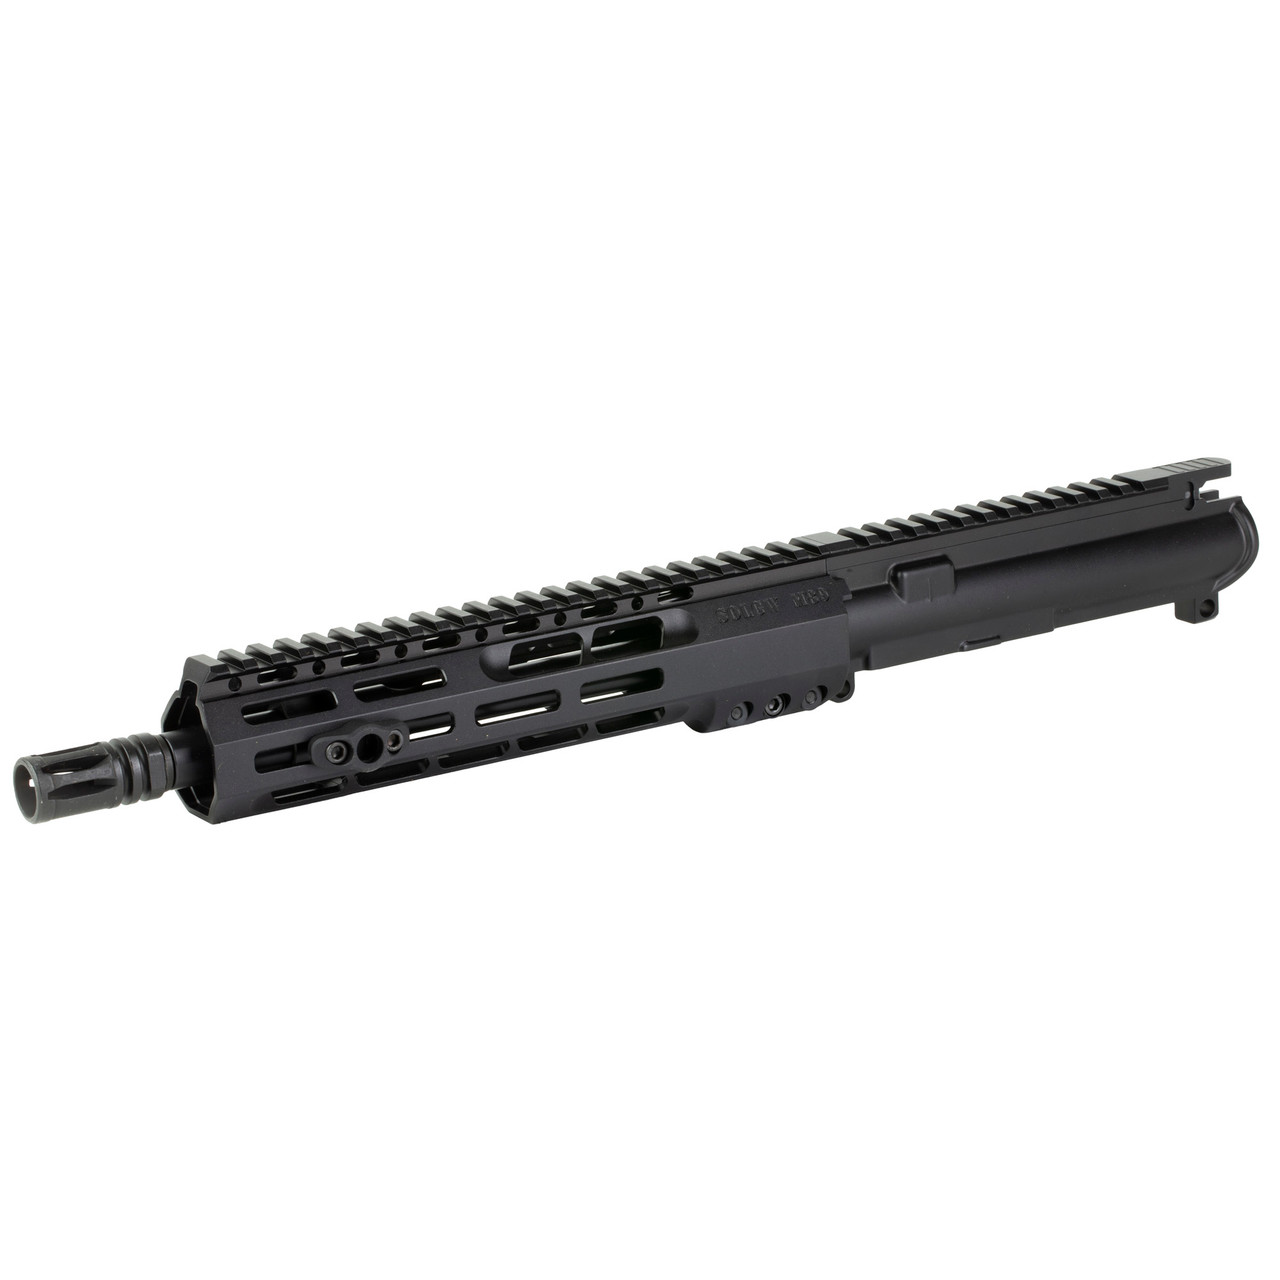 AR 15 COMPLETE UPPER RECEIVERS